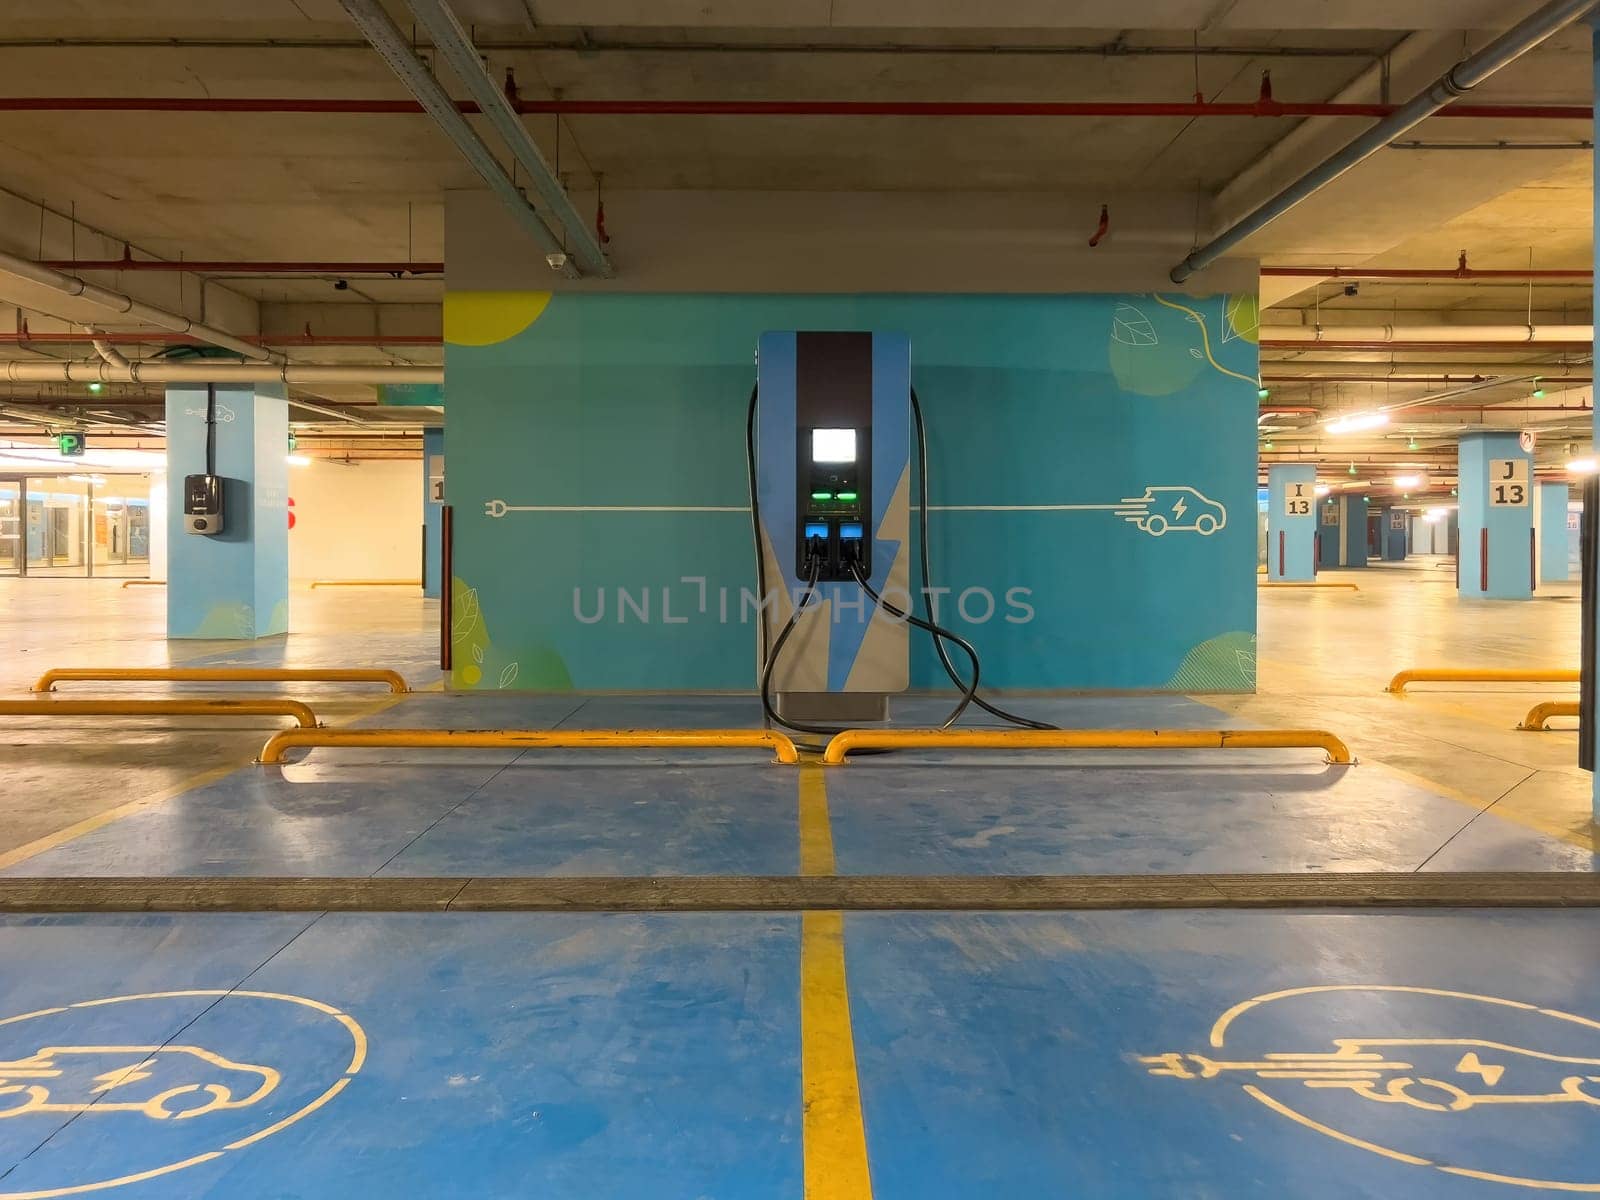 DC charging station to charge electric vehicles in the parking garage of the shopping mall by Sonat